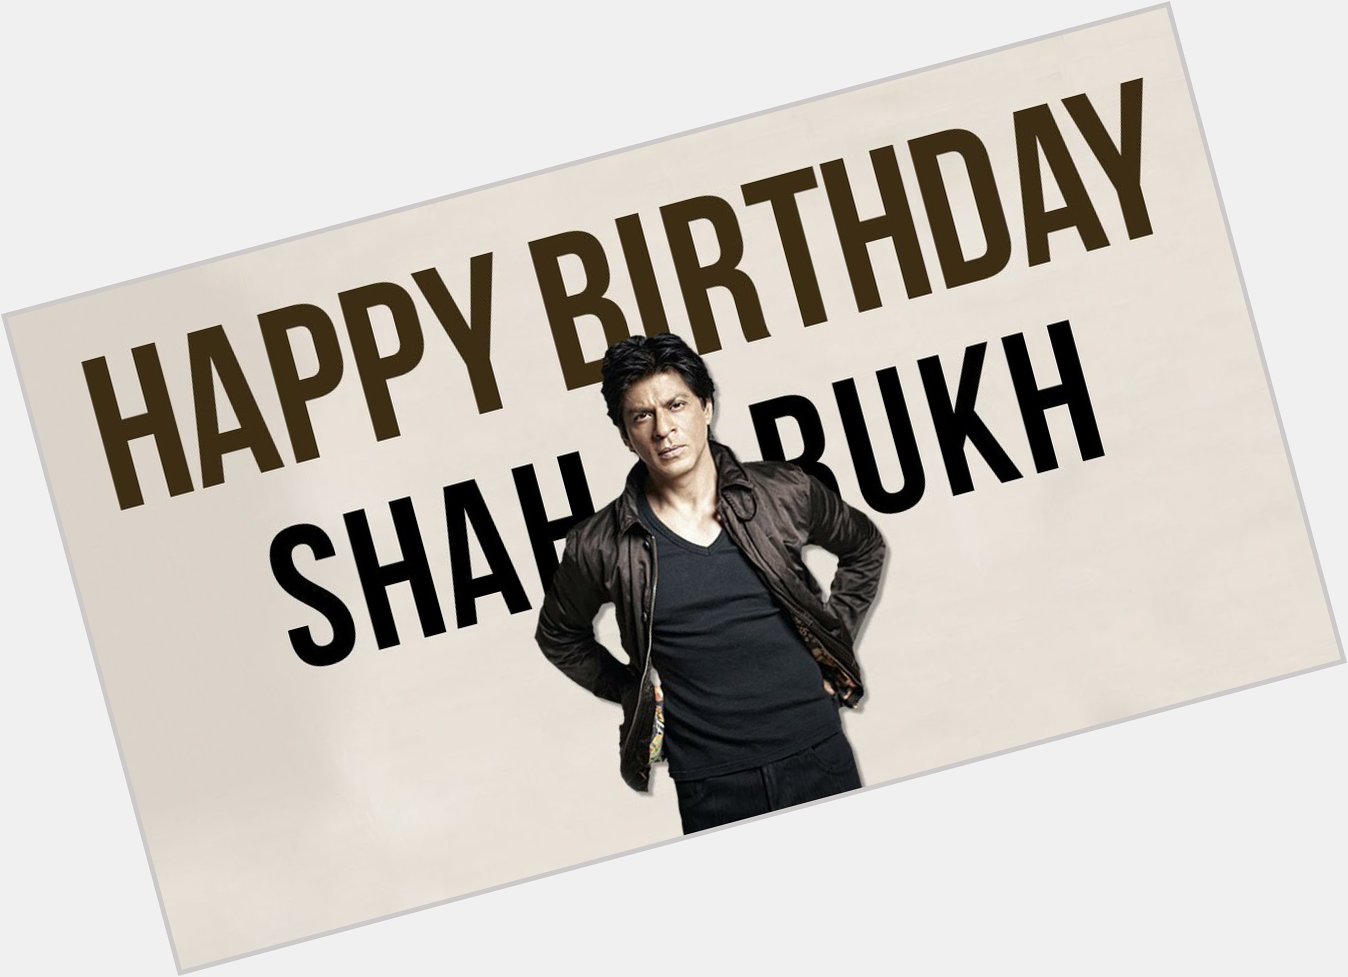 I am Feeling Proud Because I\m Your Fan
You are always a Inspiration to me
Happy Birthday Shah Rukh Khan 